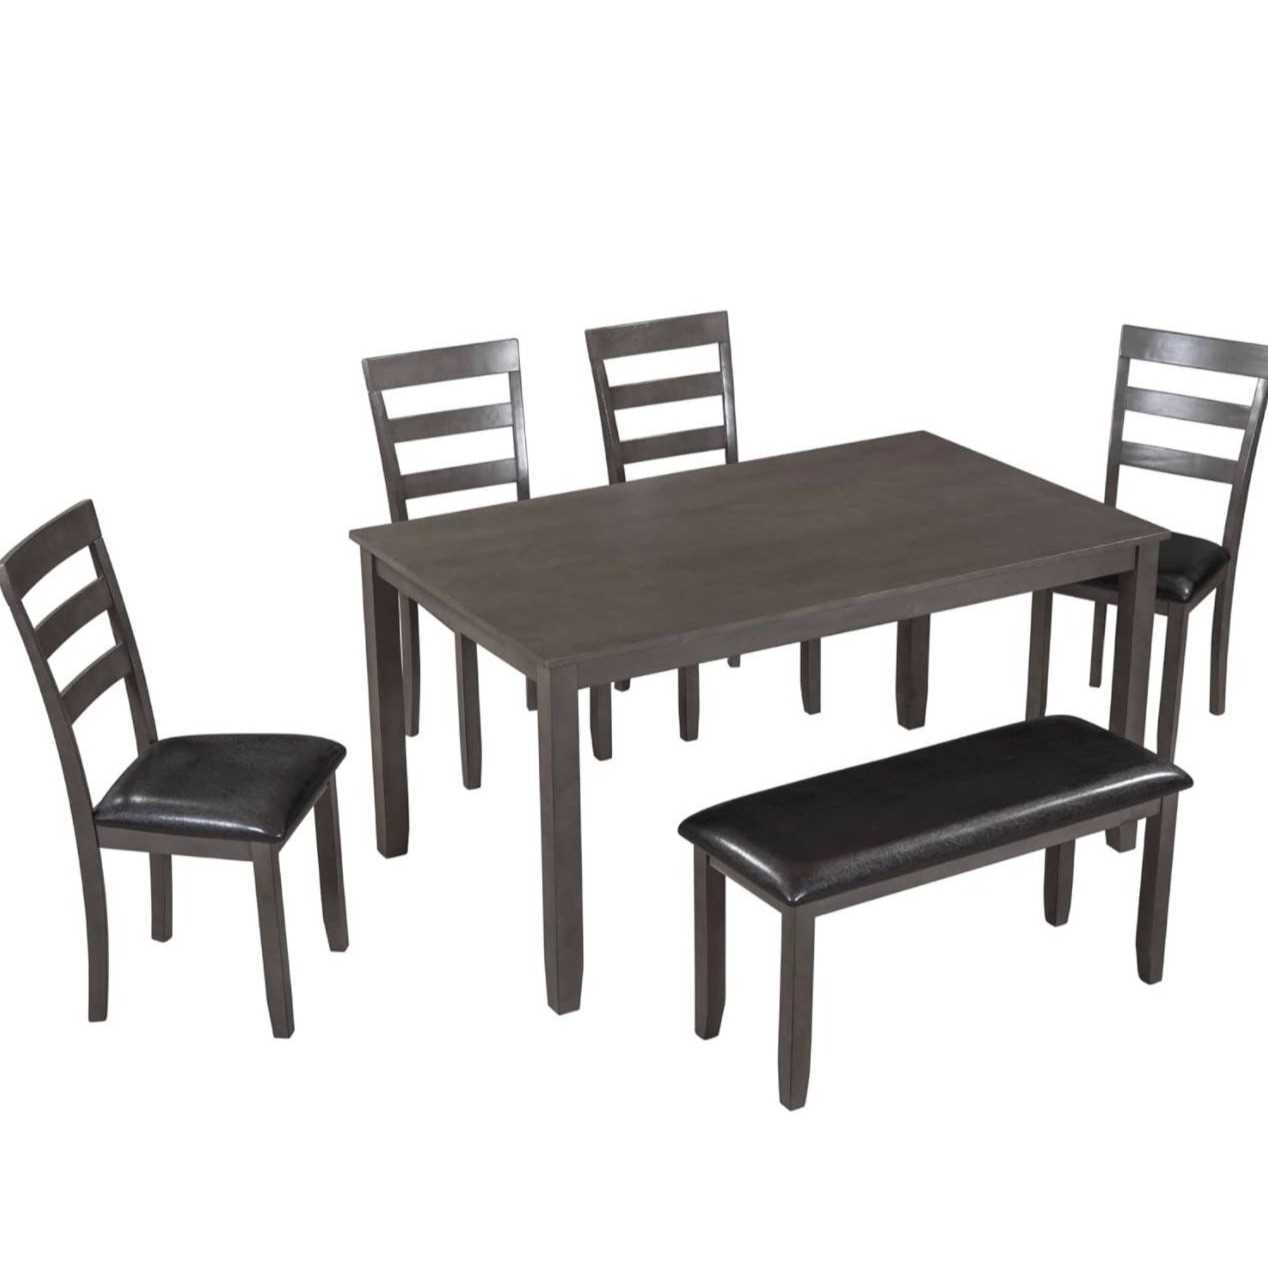 I am looking for Wooden dinning table Set